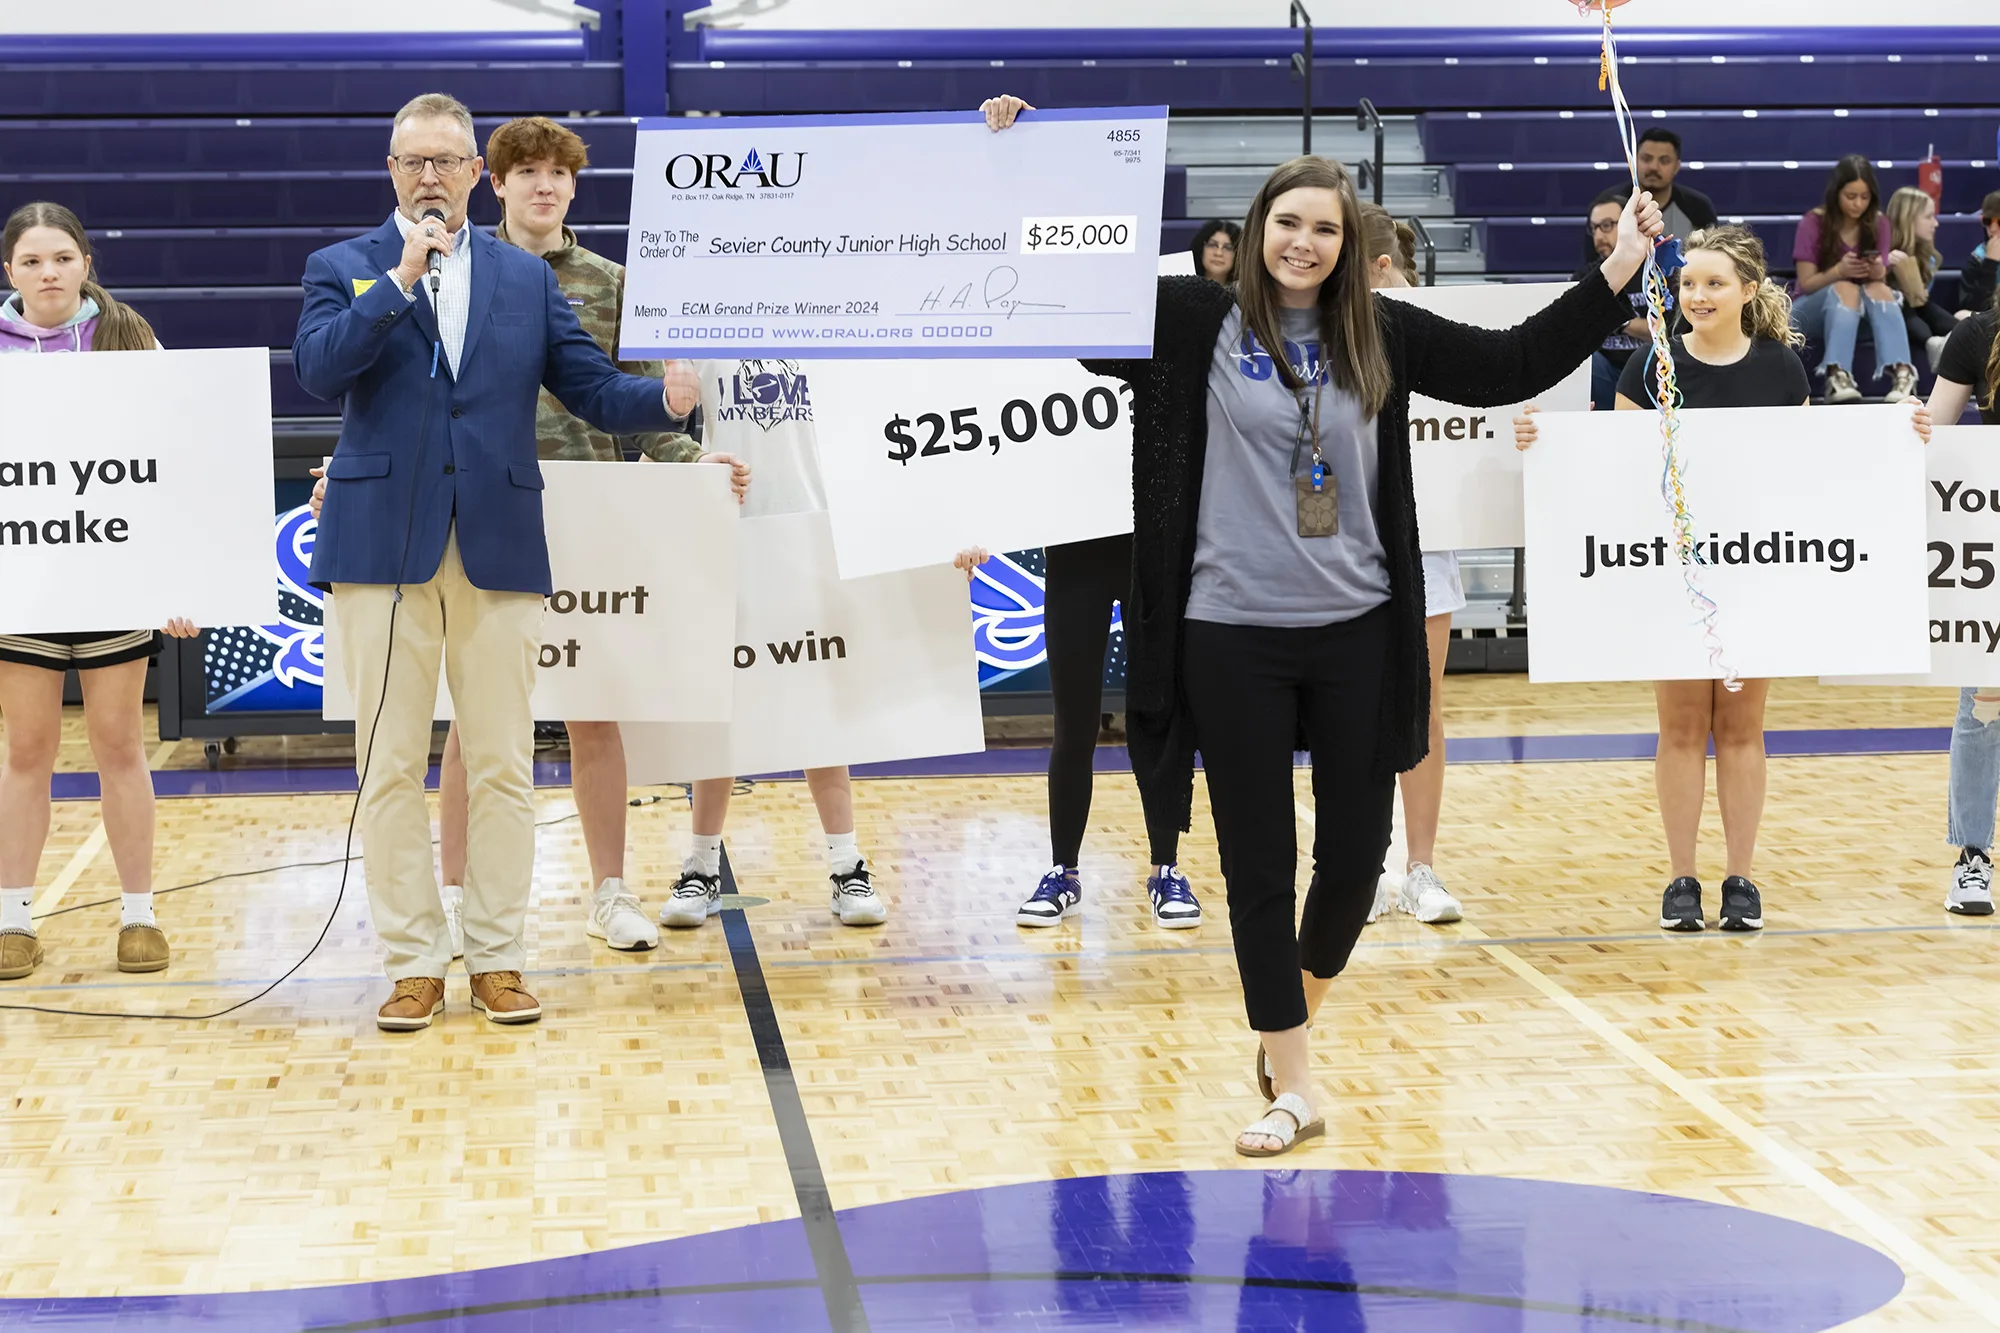 Shelby Woods, a computer science teacher at Sevier County Junior High School in Sevierville, Tennessee, was named winner of the $25,000 grand prize in ORAU’s 2024 Extreme Classroom Makeover.